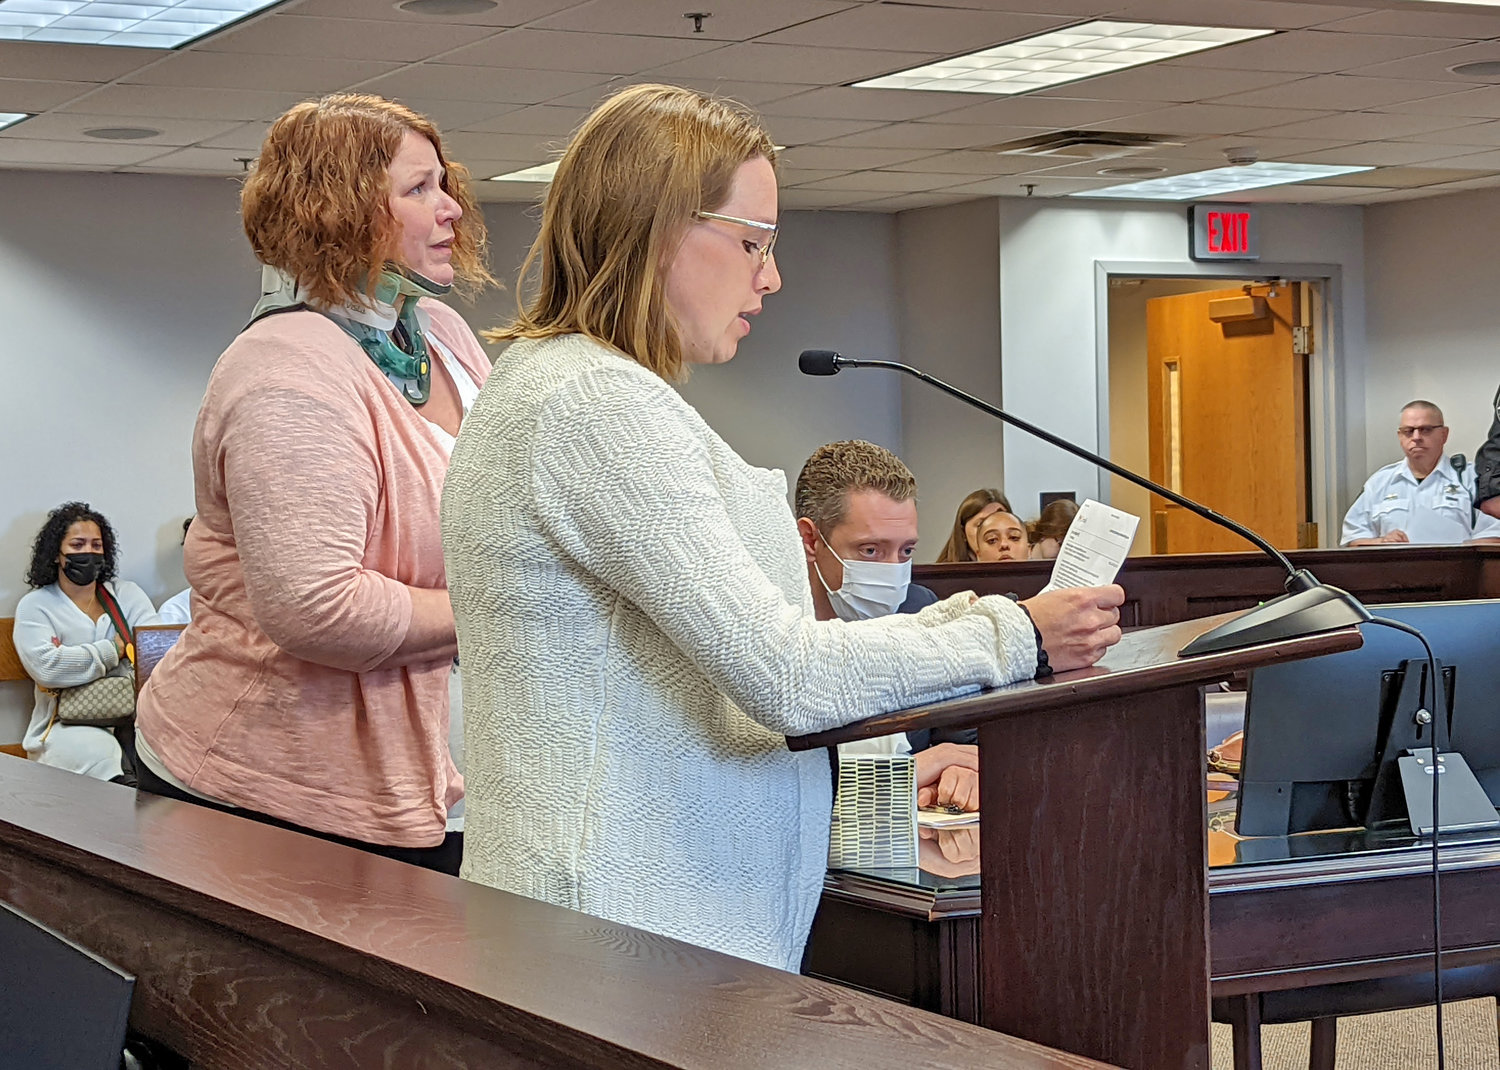 Sarah J. Stinebrickner, of Boonville, continues to wear a neck brace and walk with a cane nearly two years after the September 2020 crash on Route 12 in Boonville. Her sister was killed in the crash. Assistant District Attorney Rebecca G. Kelleher read a statement from Stinebrickner in court on Wednesday.